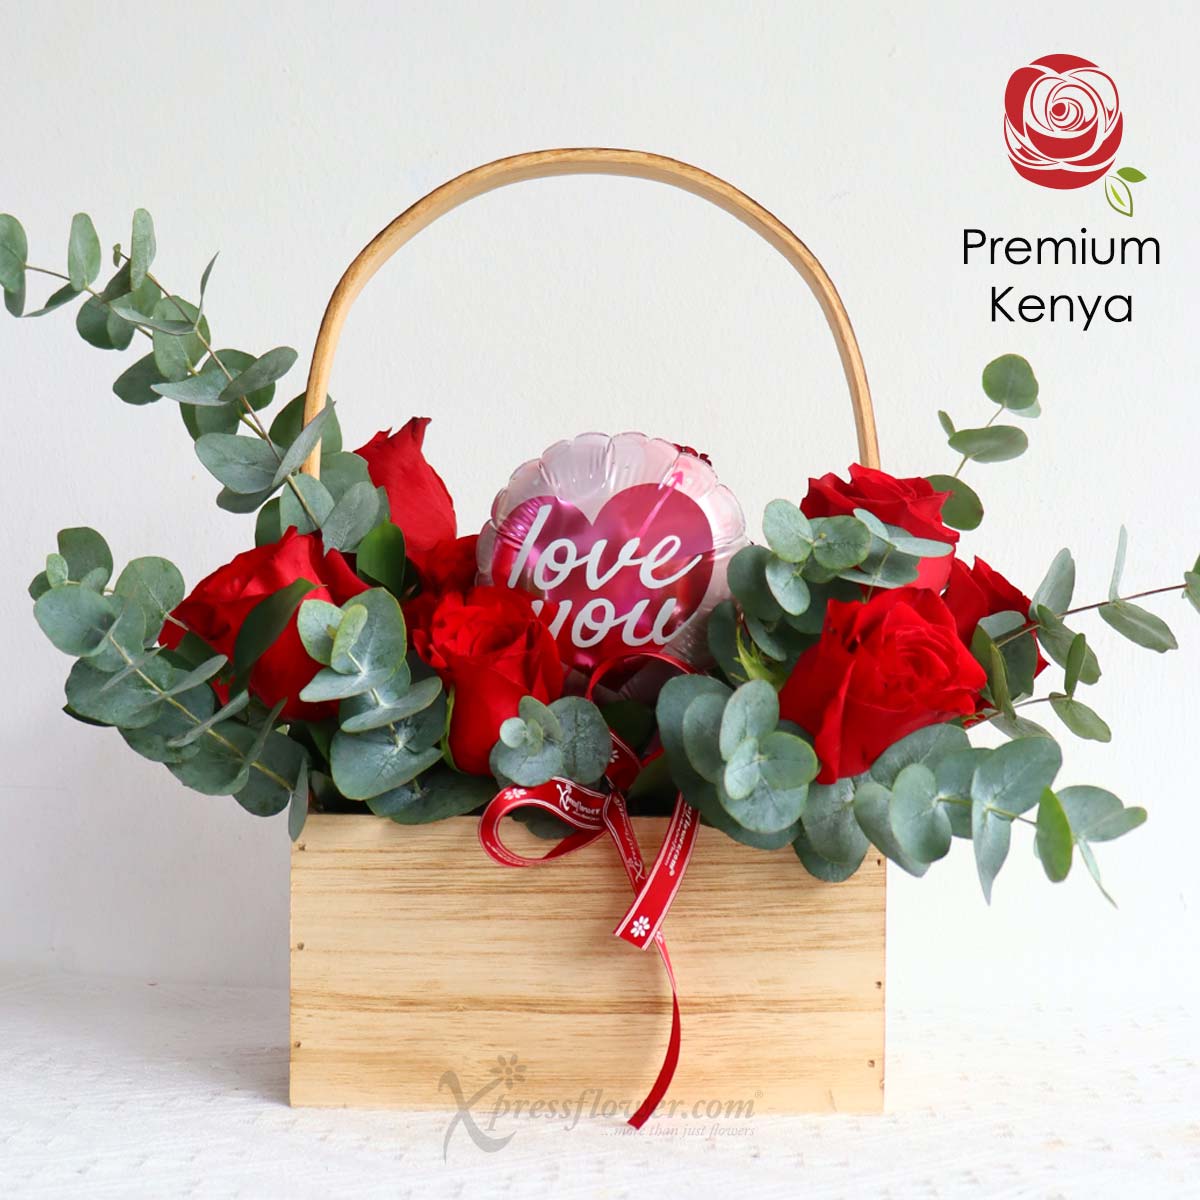 AR2233_Lovecast Surprise (10 Red Roses with “Love You” Mini Balloon)1b